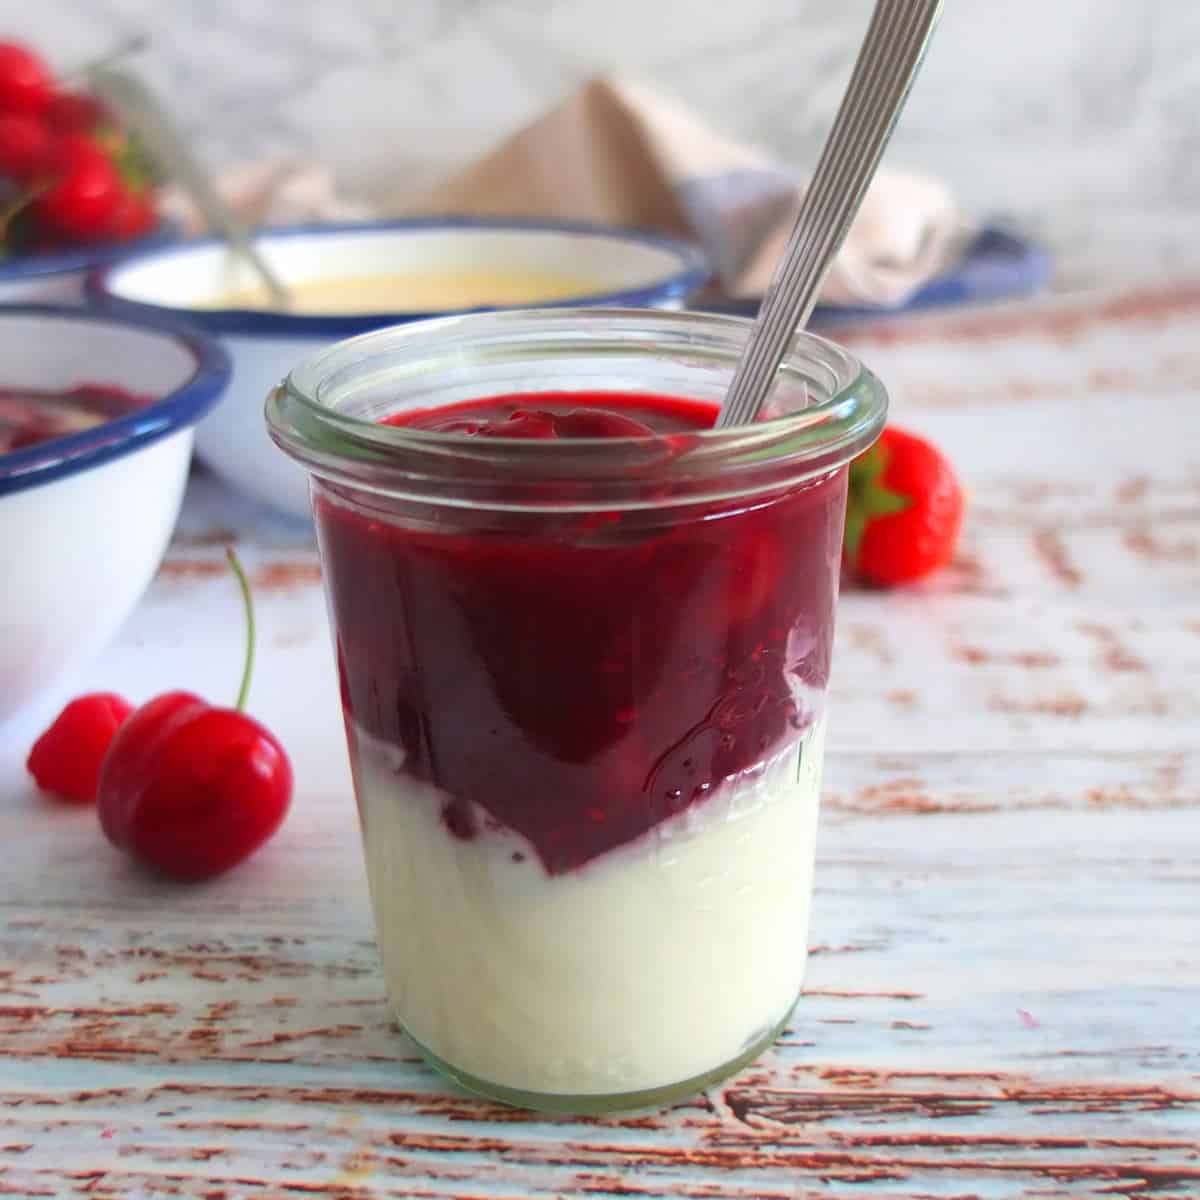 Rote Grütze (German Red Berry Pudding) - My Dinner